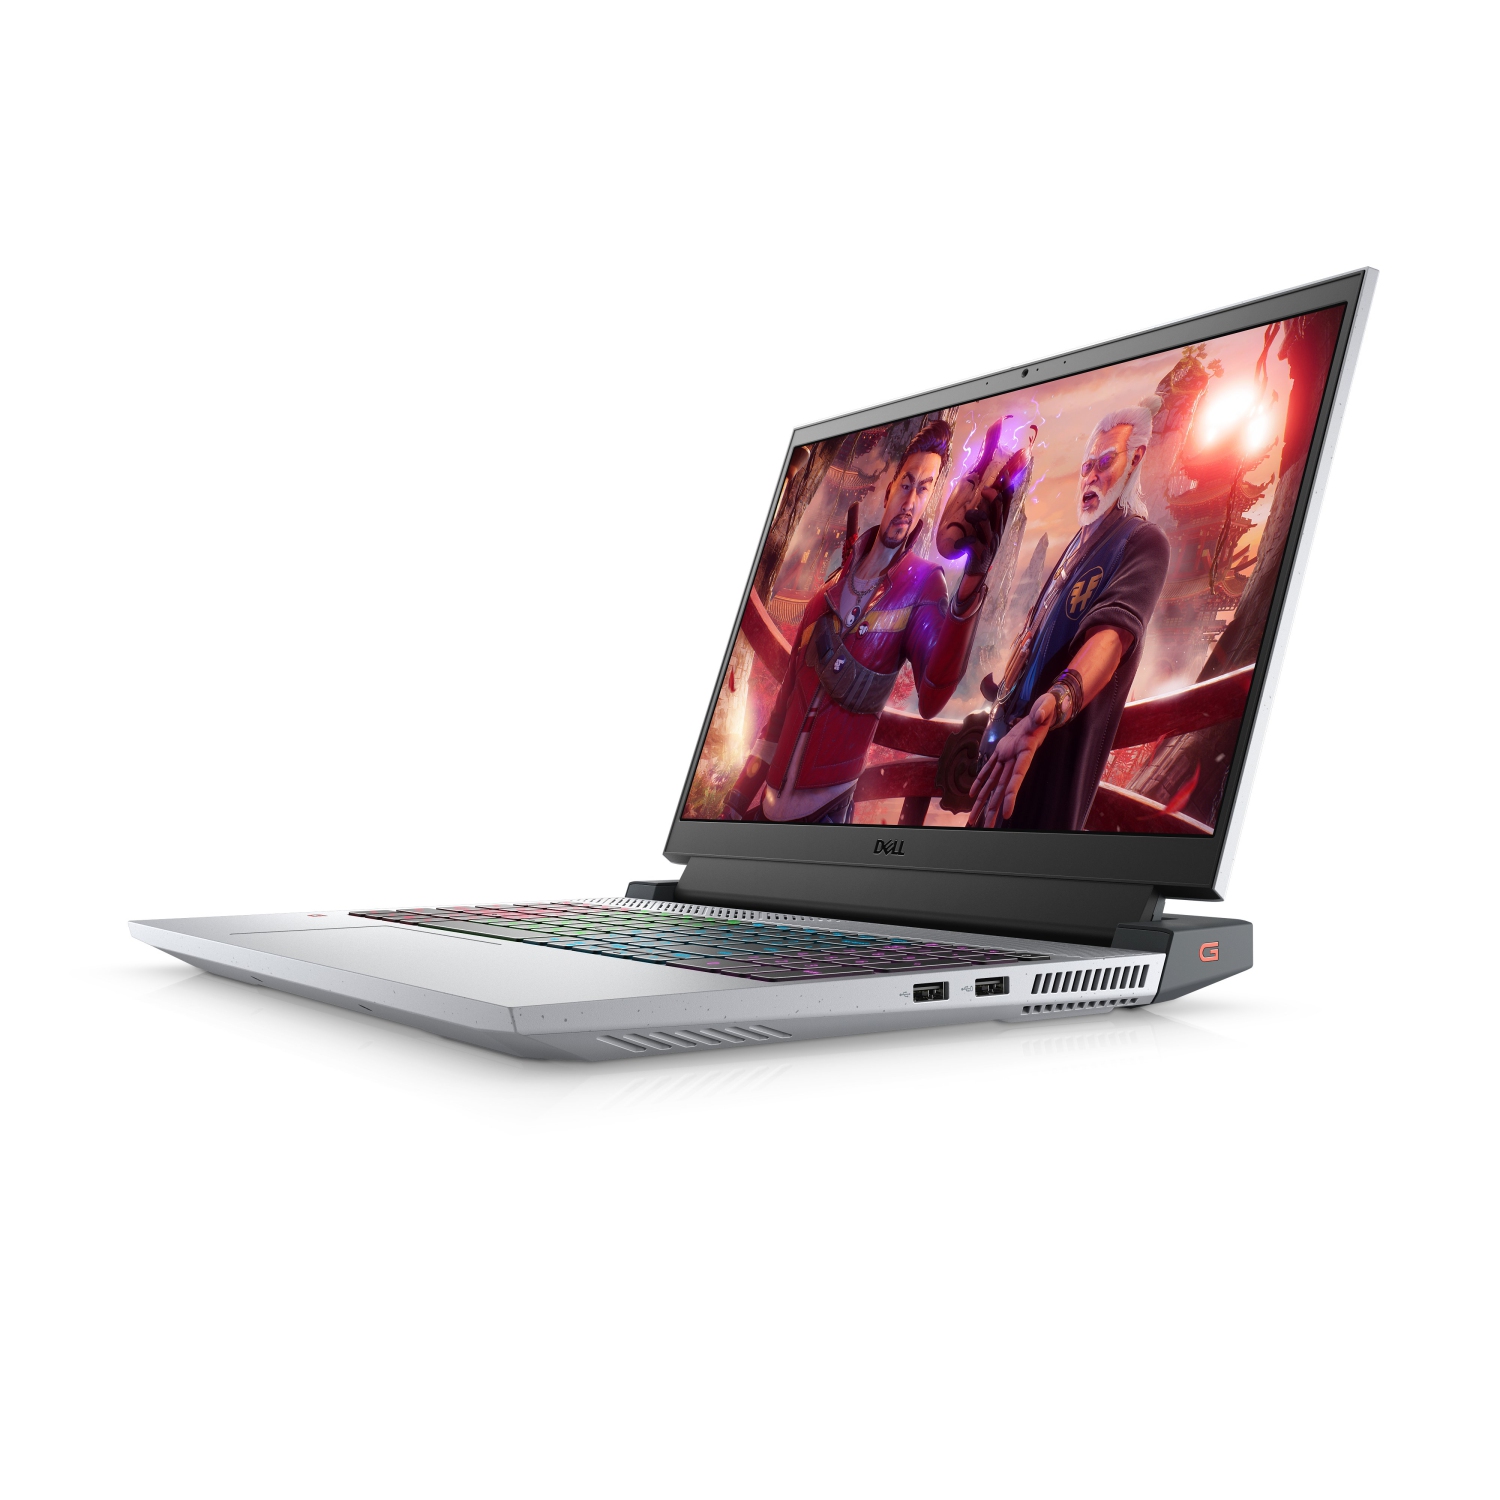 Refurbished (Excellent) - Dell G15 5515 Gaming Laptop (2021) | 15.6" FHD | Core Ryzen 7 - 256GB SSD - 8GB RAM - 3050 Ti | 8 Cores @ 4.4 GHz Certified Refurbished